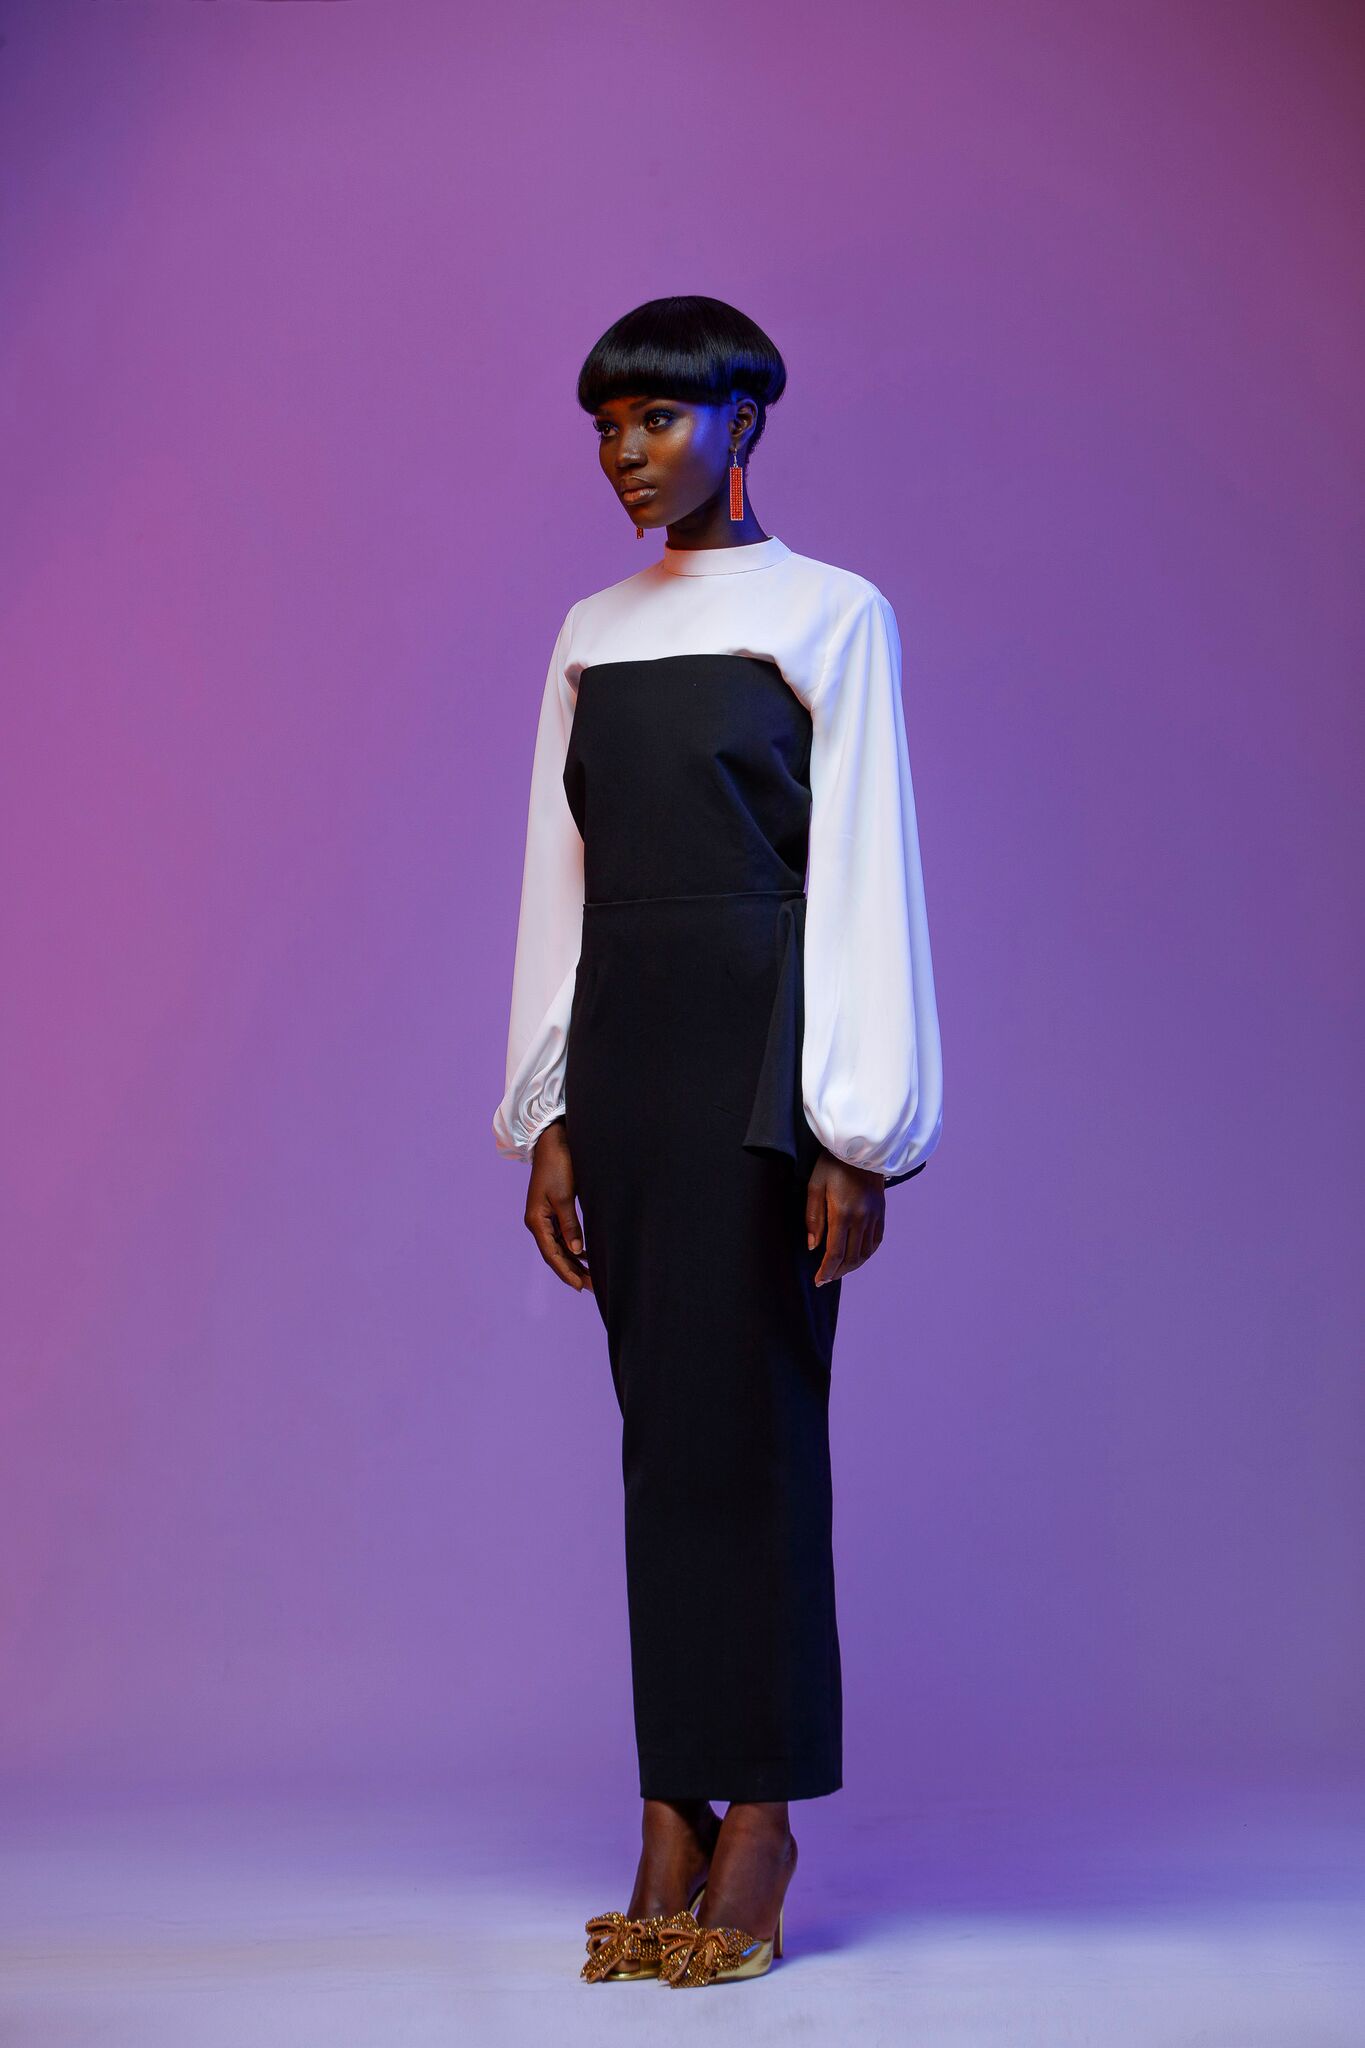 You Need to See TIATTRA’s New Ultra-Feminine Collection